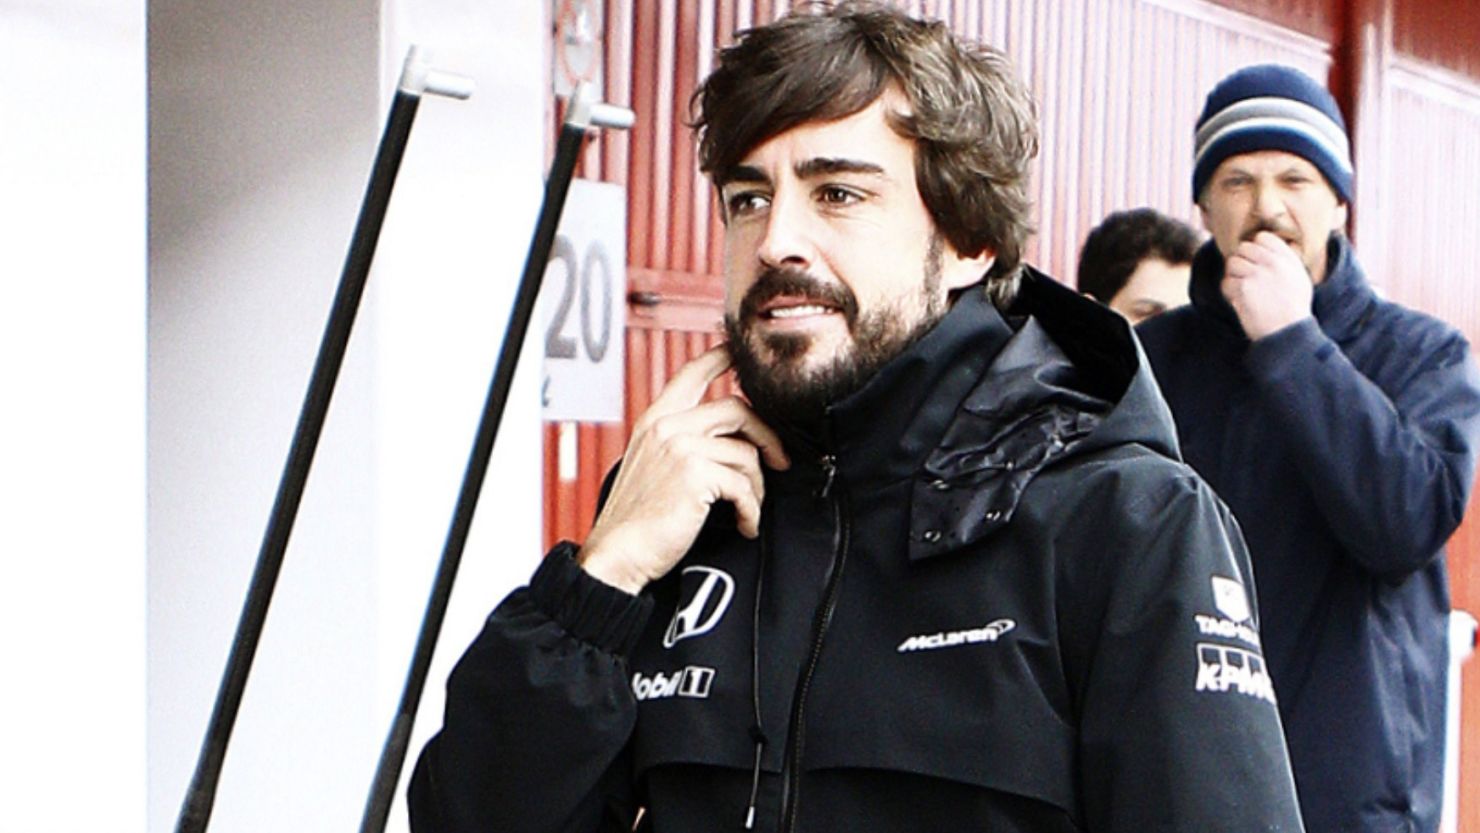 Fernando Alonso is ready to race but must pass an FIA medical first in Malaysia